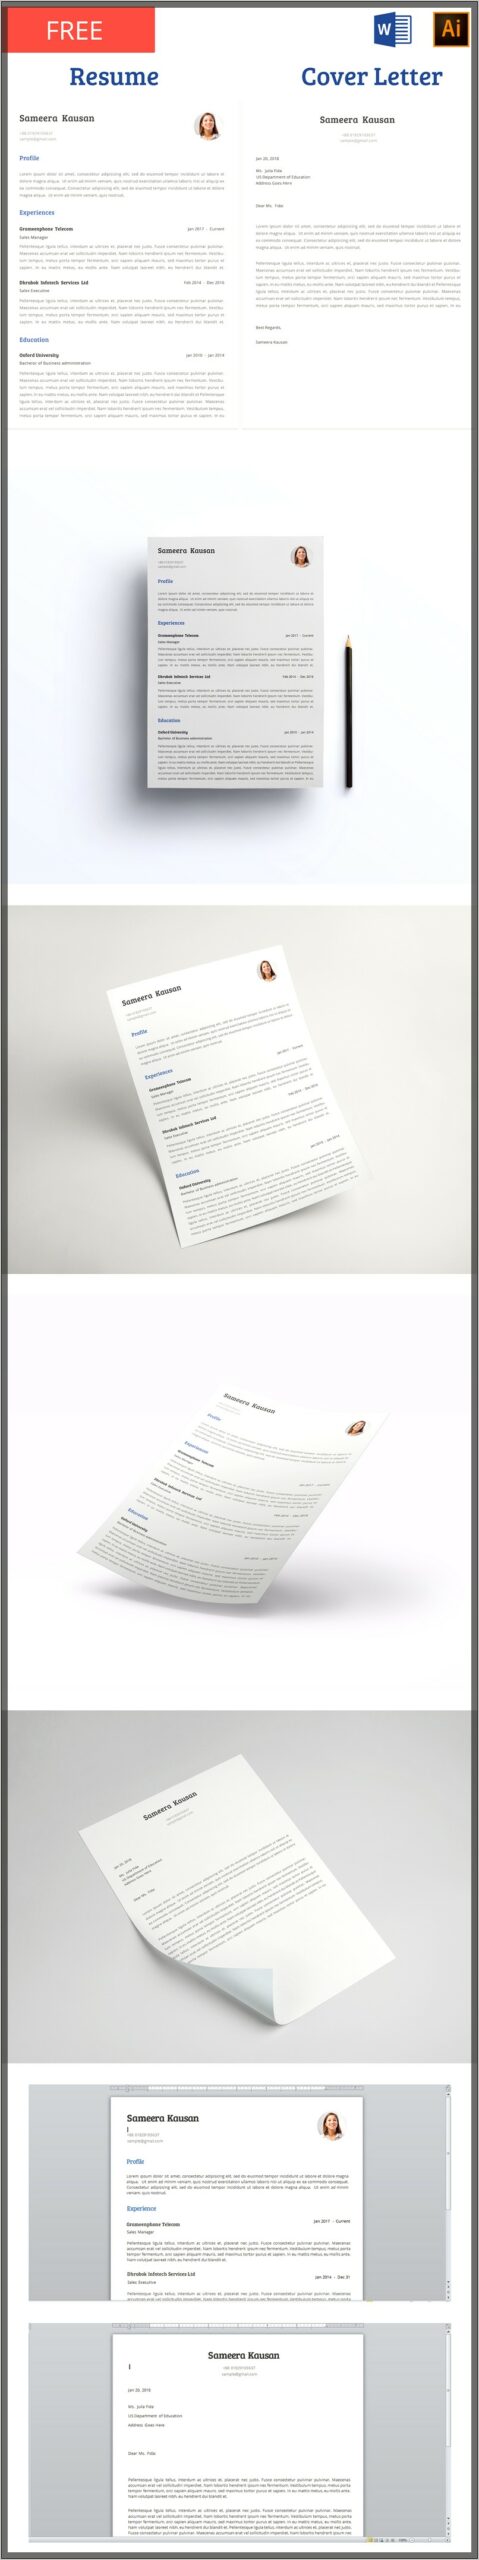 Resume And Cover Letter Template Website